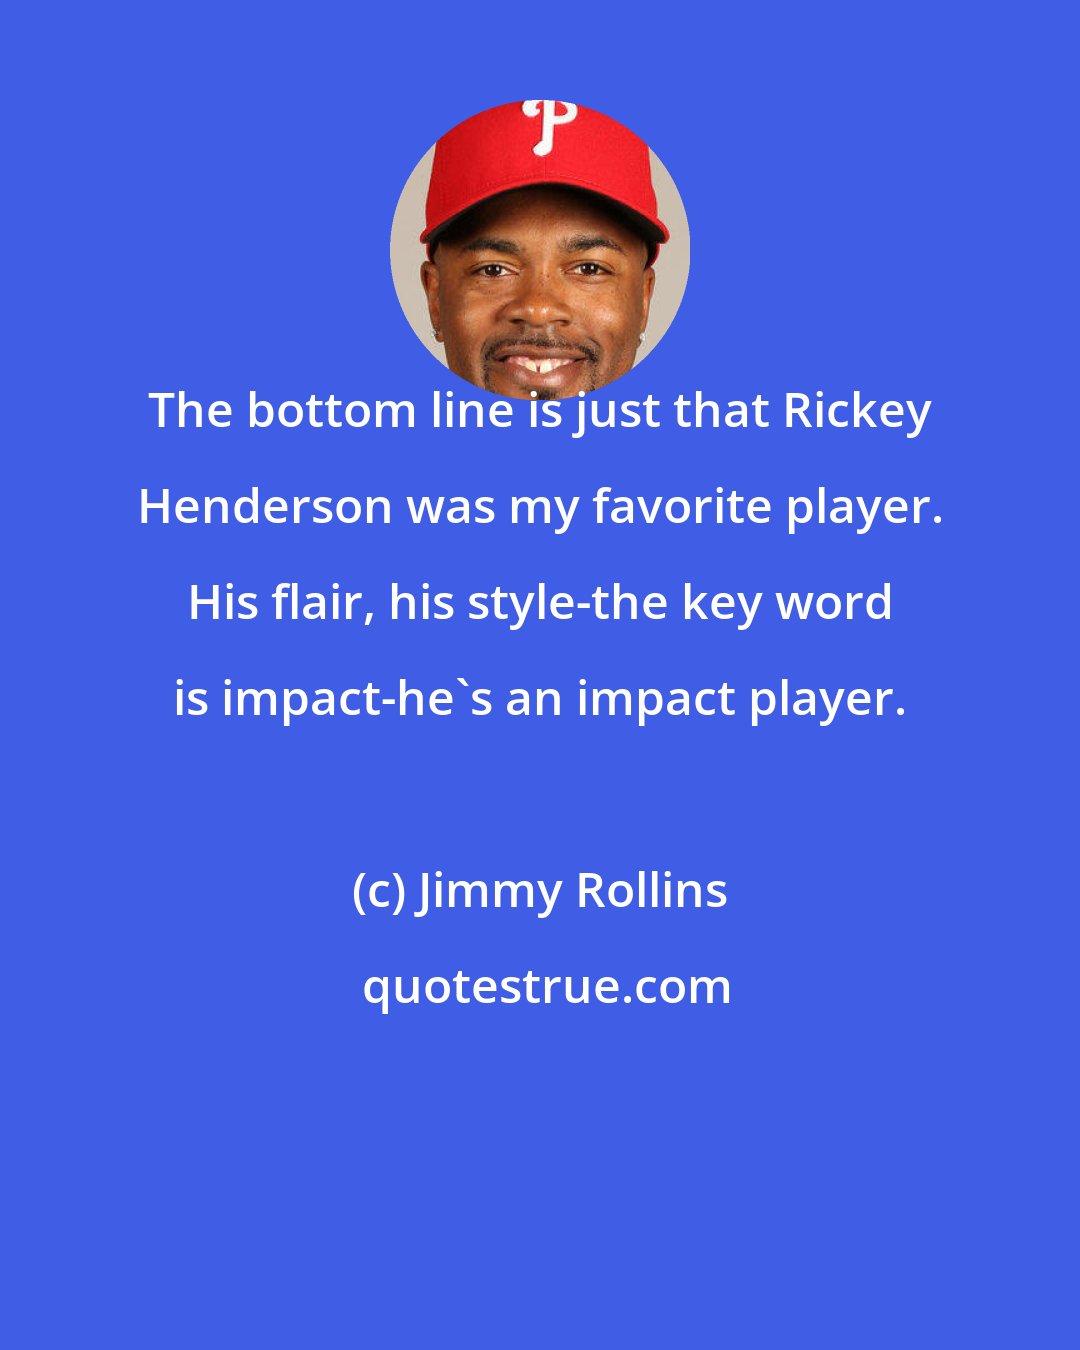 Jimmy Rollins: The bottom line is just that Rickey Henderson was my favorite player. His flair, his style-the key word is impact-he's an impact player.